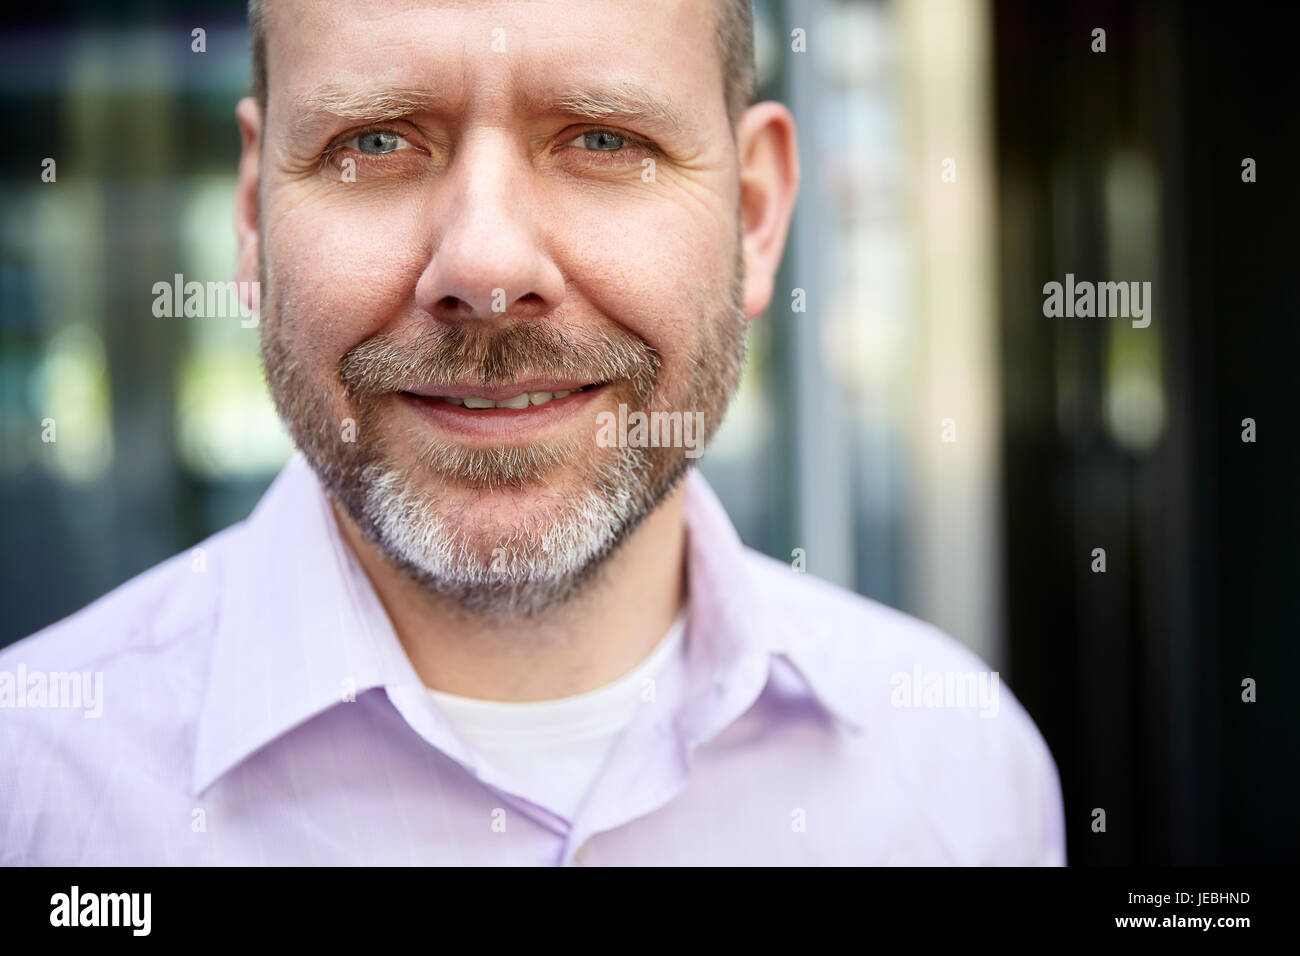 Outdoor portrait of mature man in front of office building. Banque D'Images